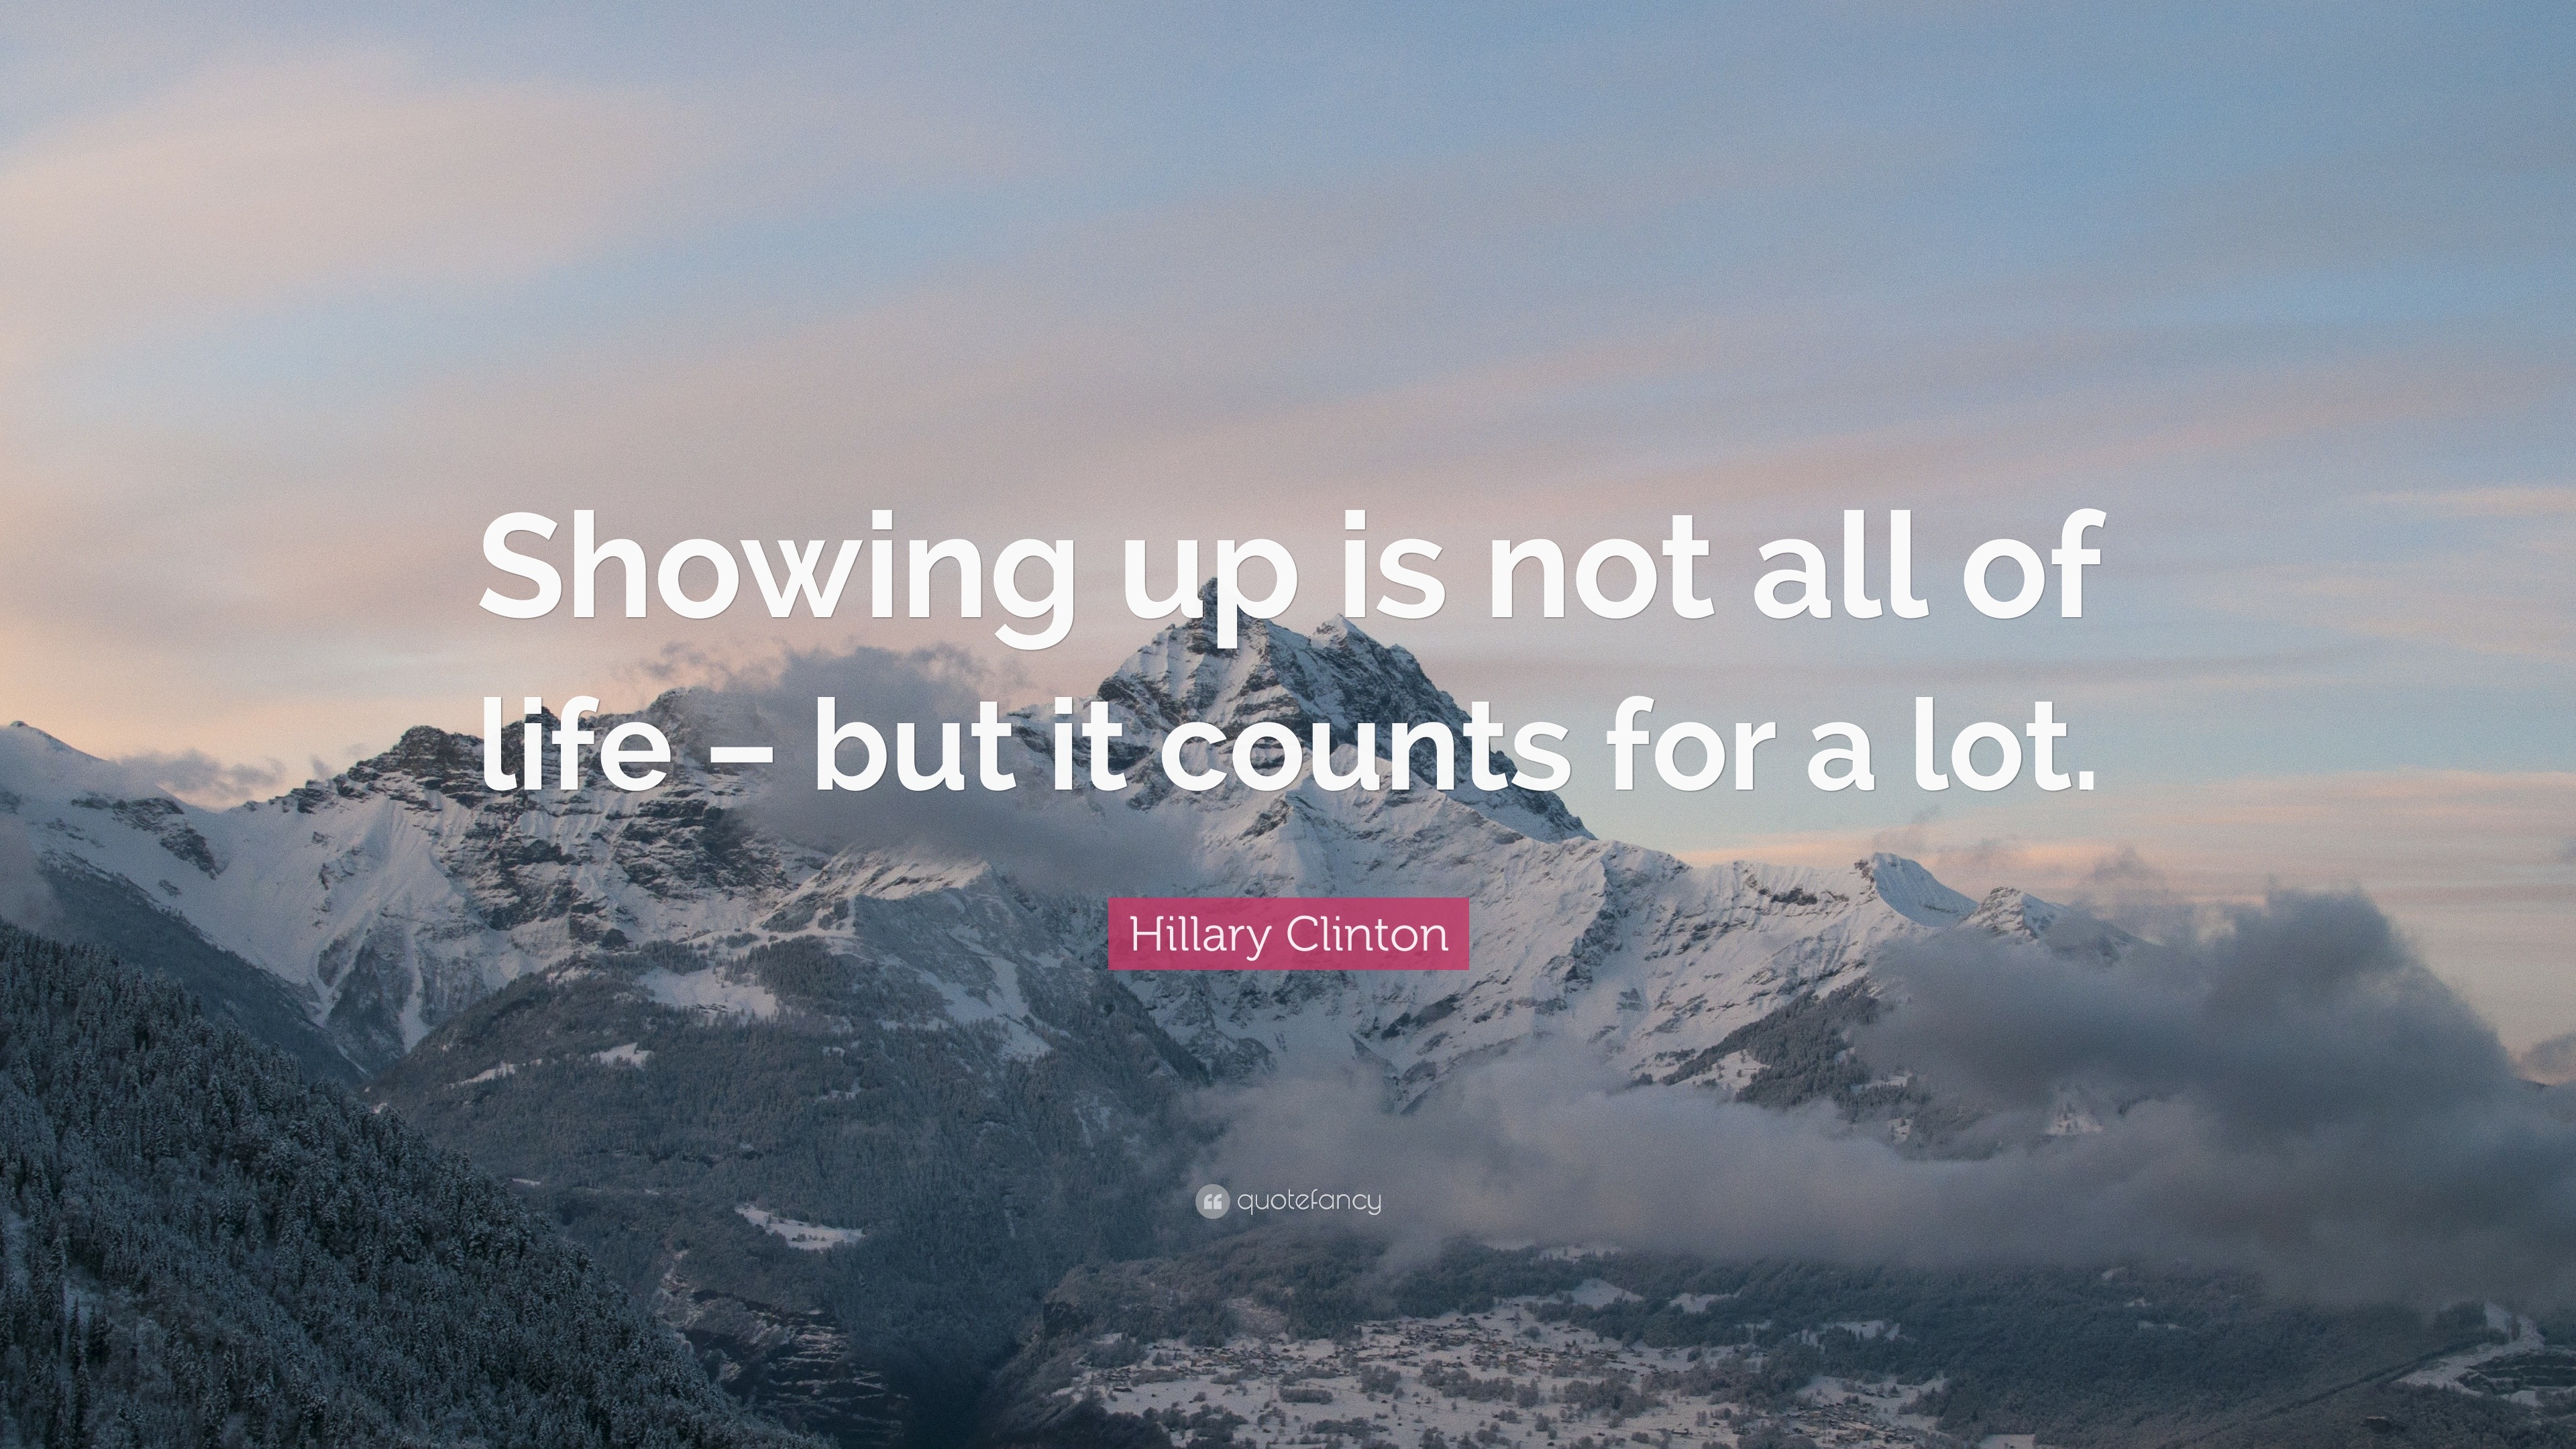 Hillary Clinton Quote: “Showing up is not all of life – but it counts ...